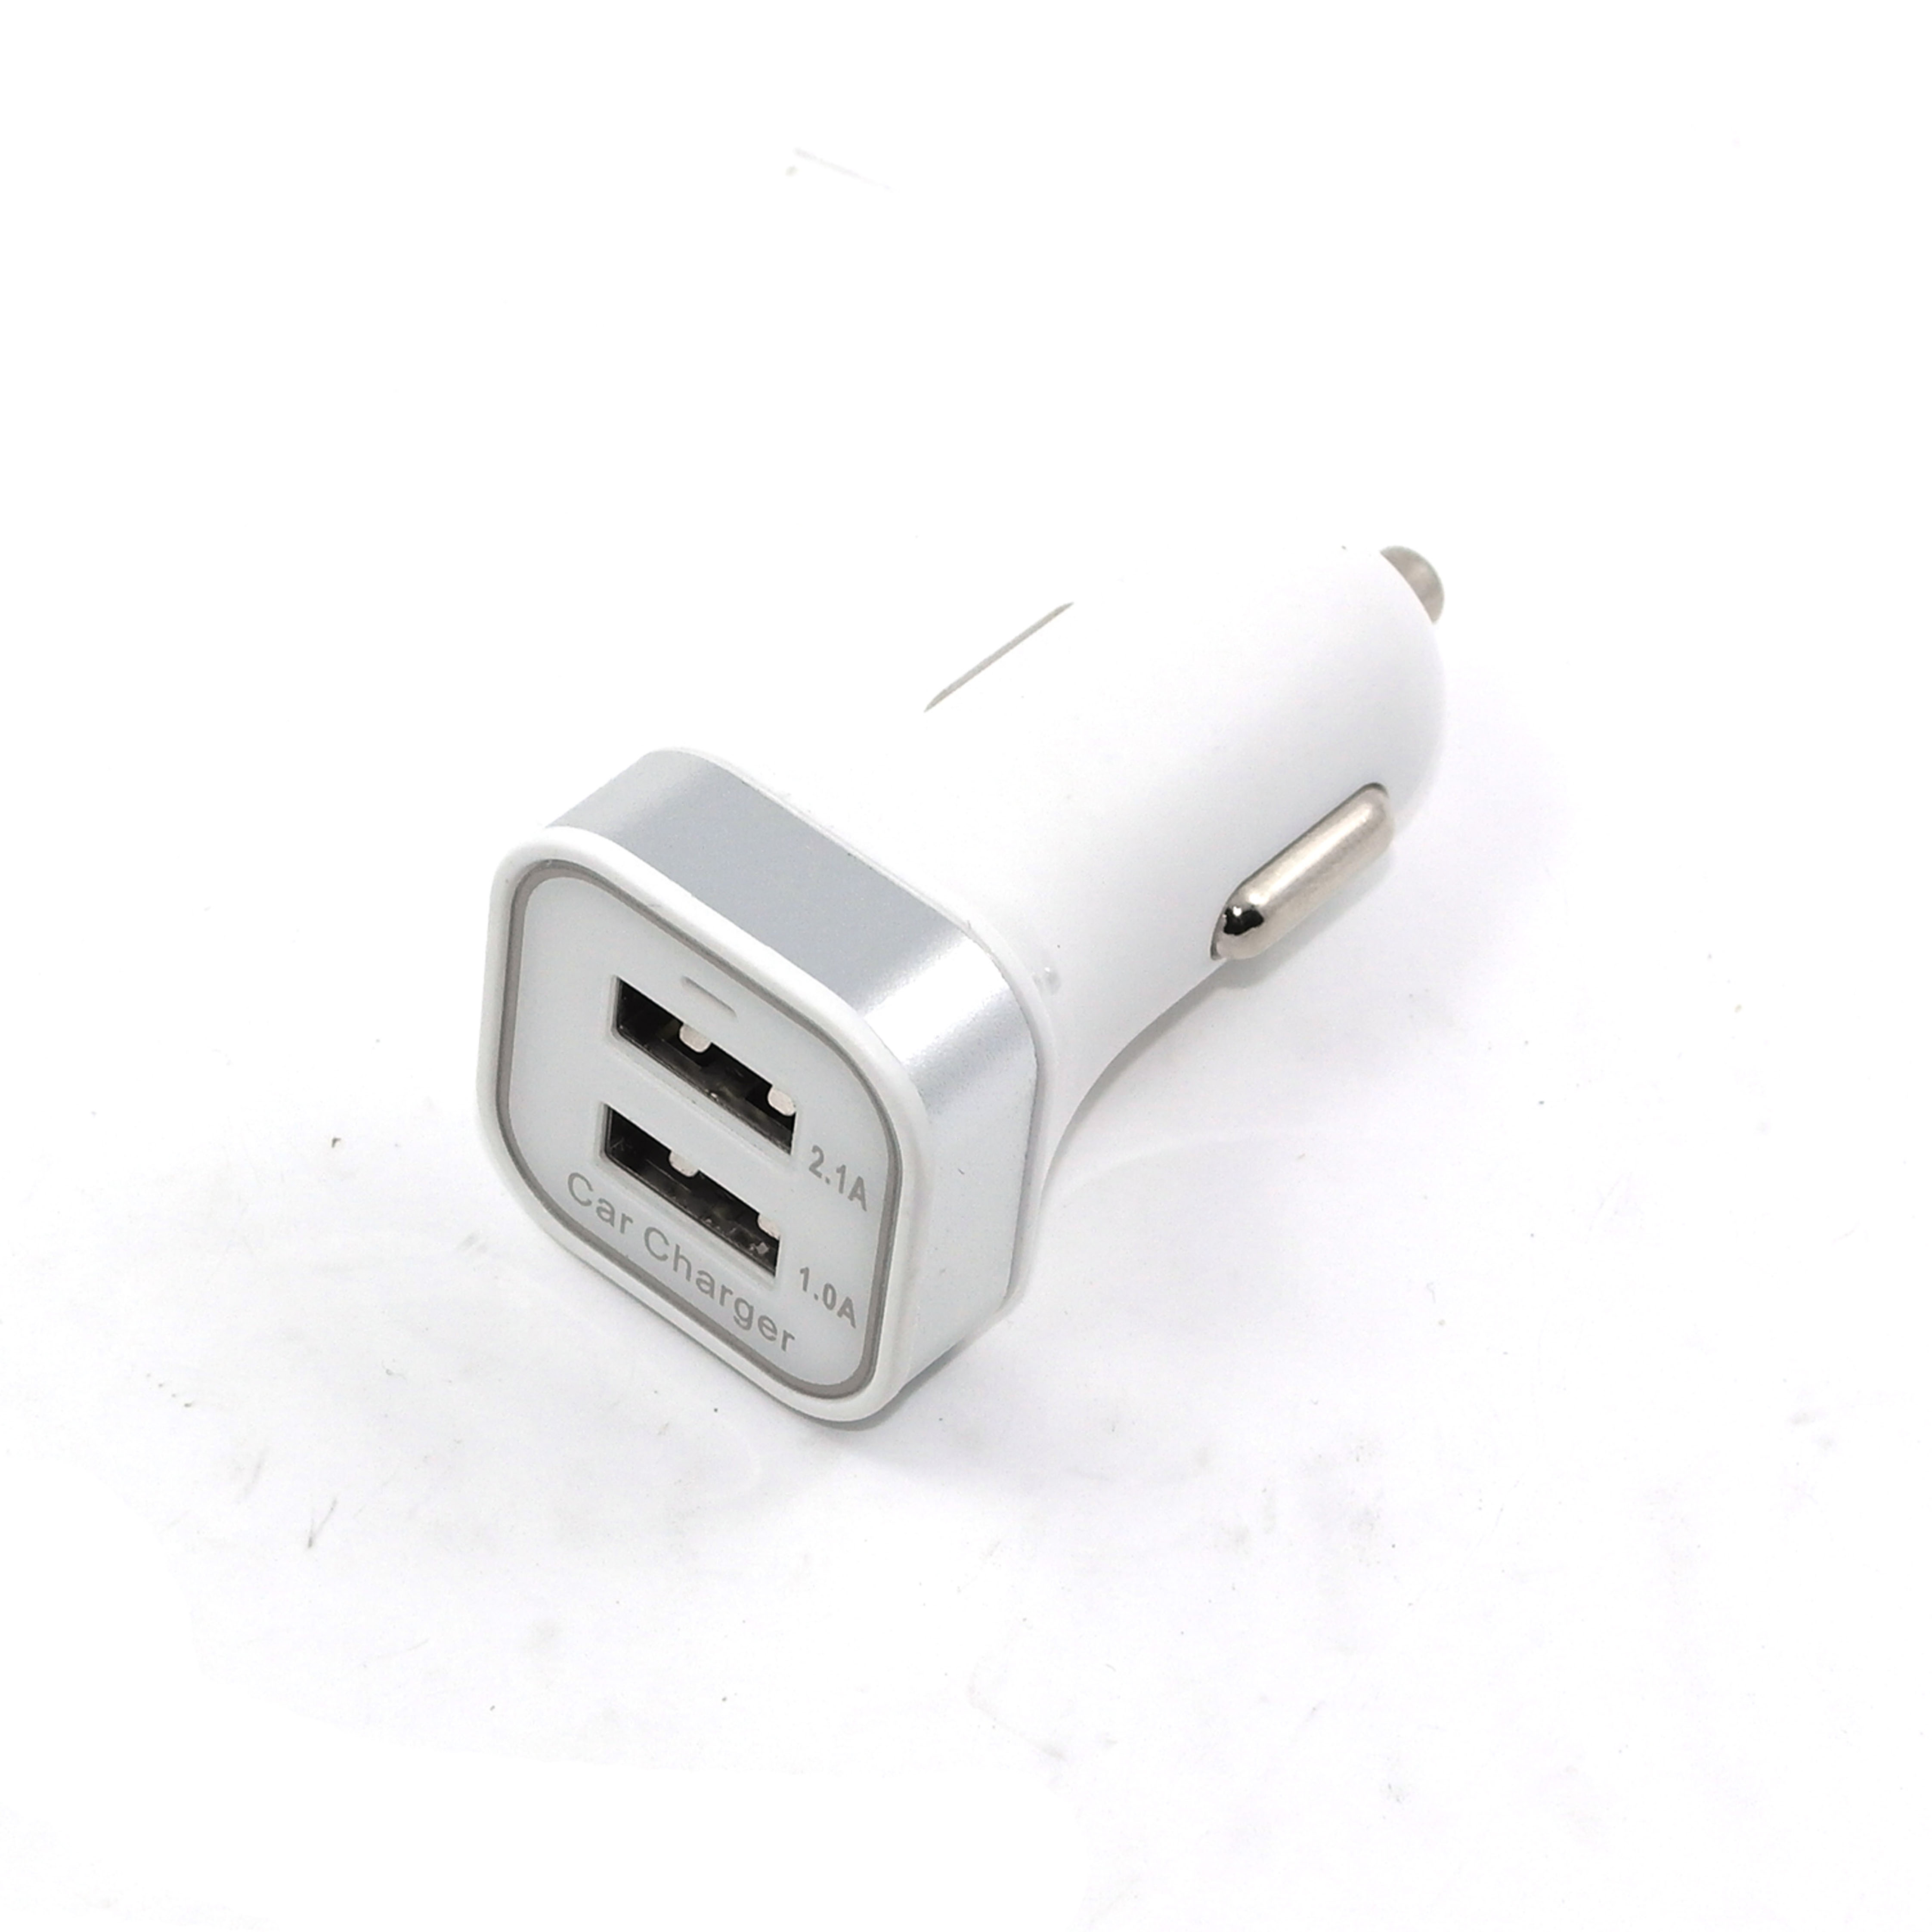 KRE-0503100C,5V 3.1A Dual USB Car Charger, Dual USB In-car charger